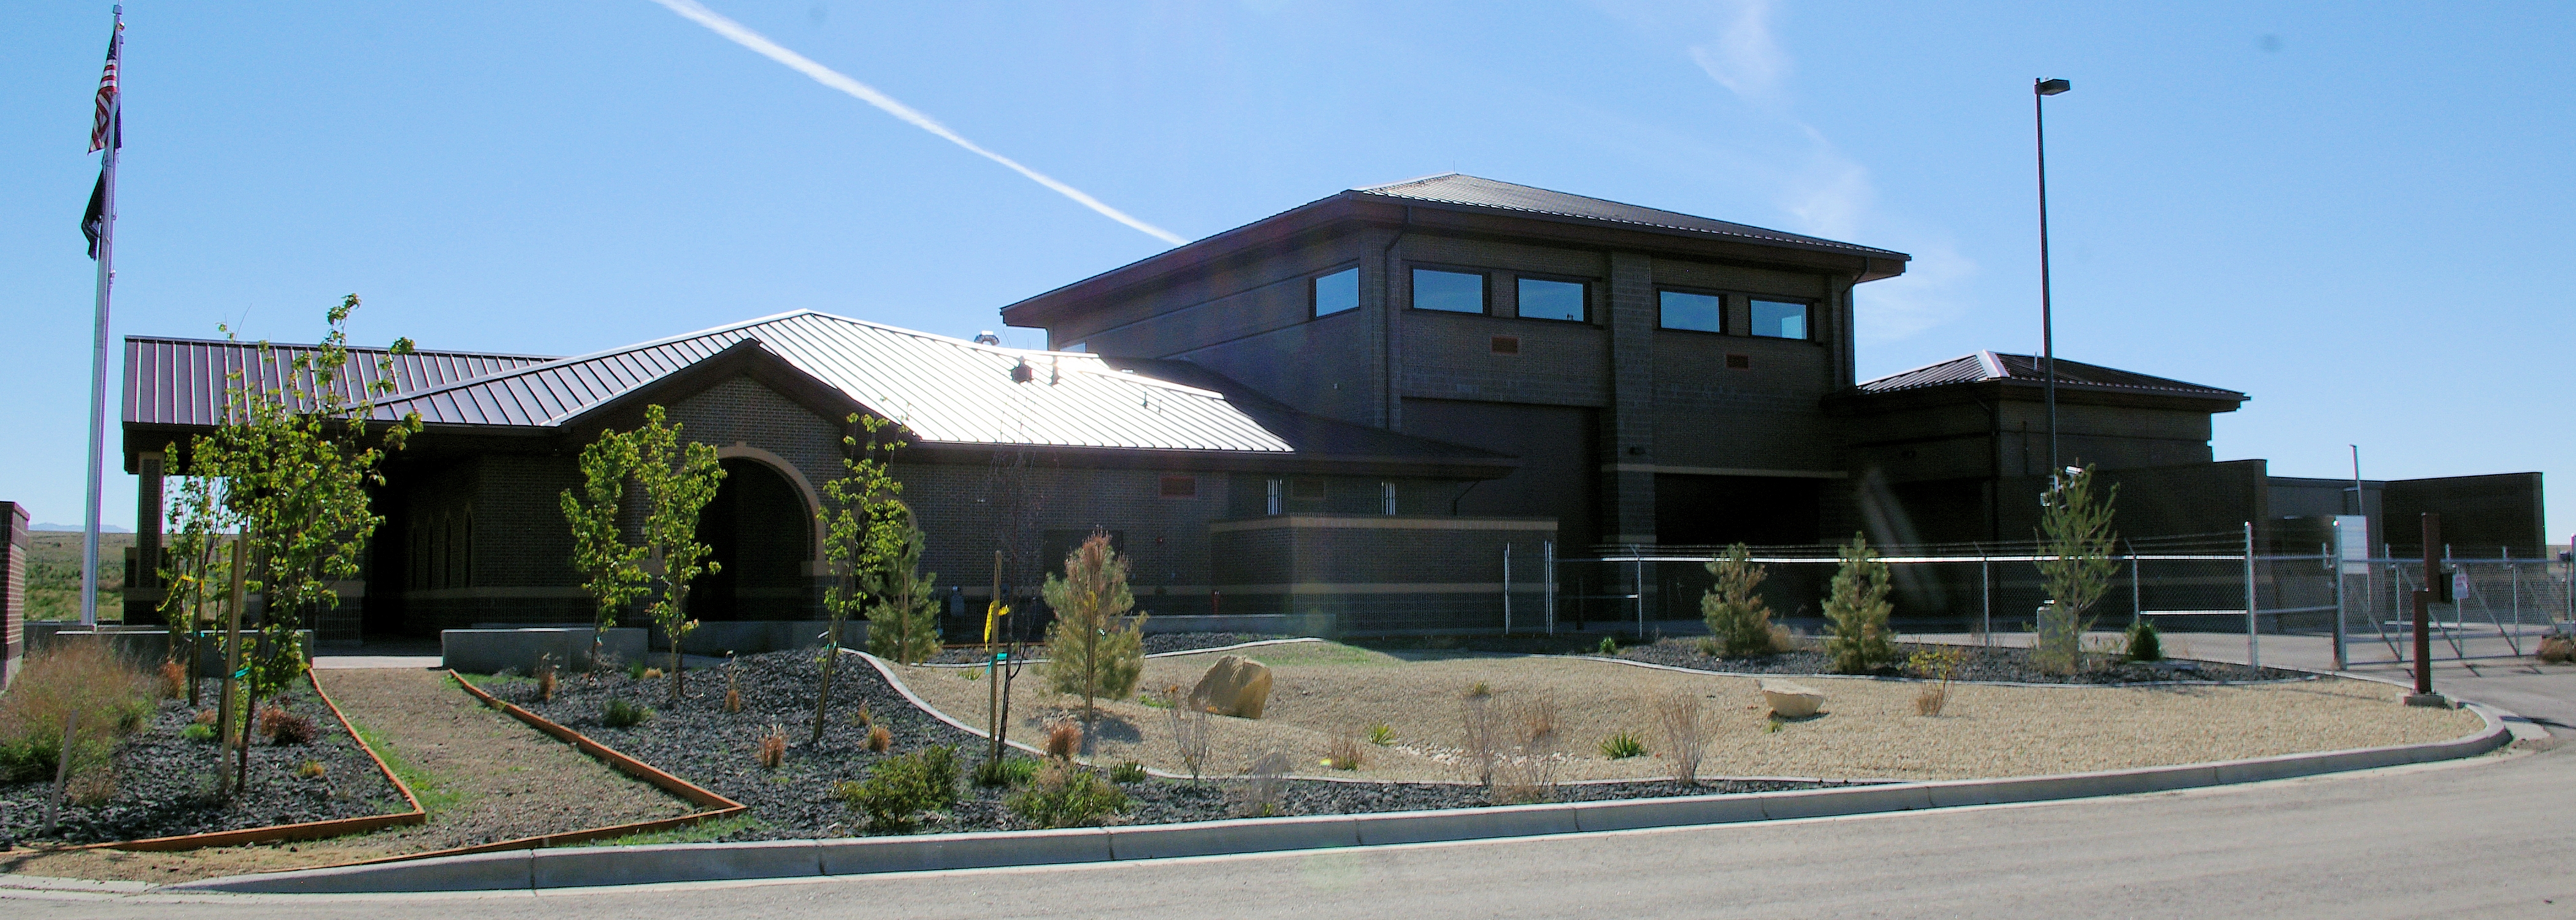 Tactical Unmanned Aerial Support Facility Project West Side, Mountain Home, Idaho